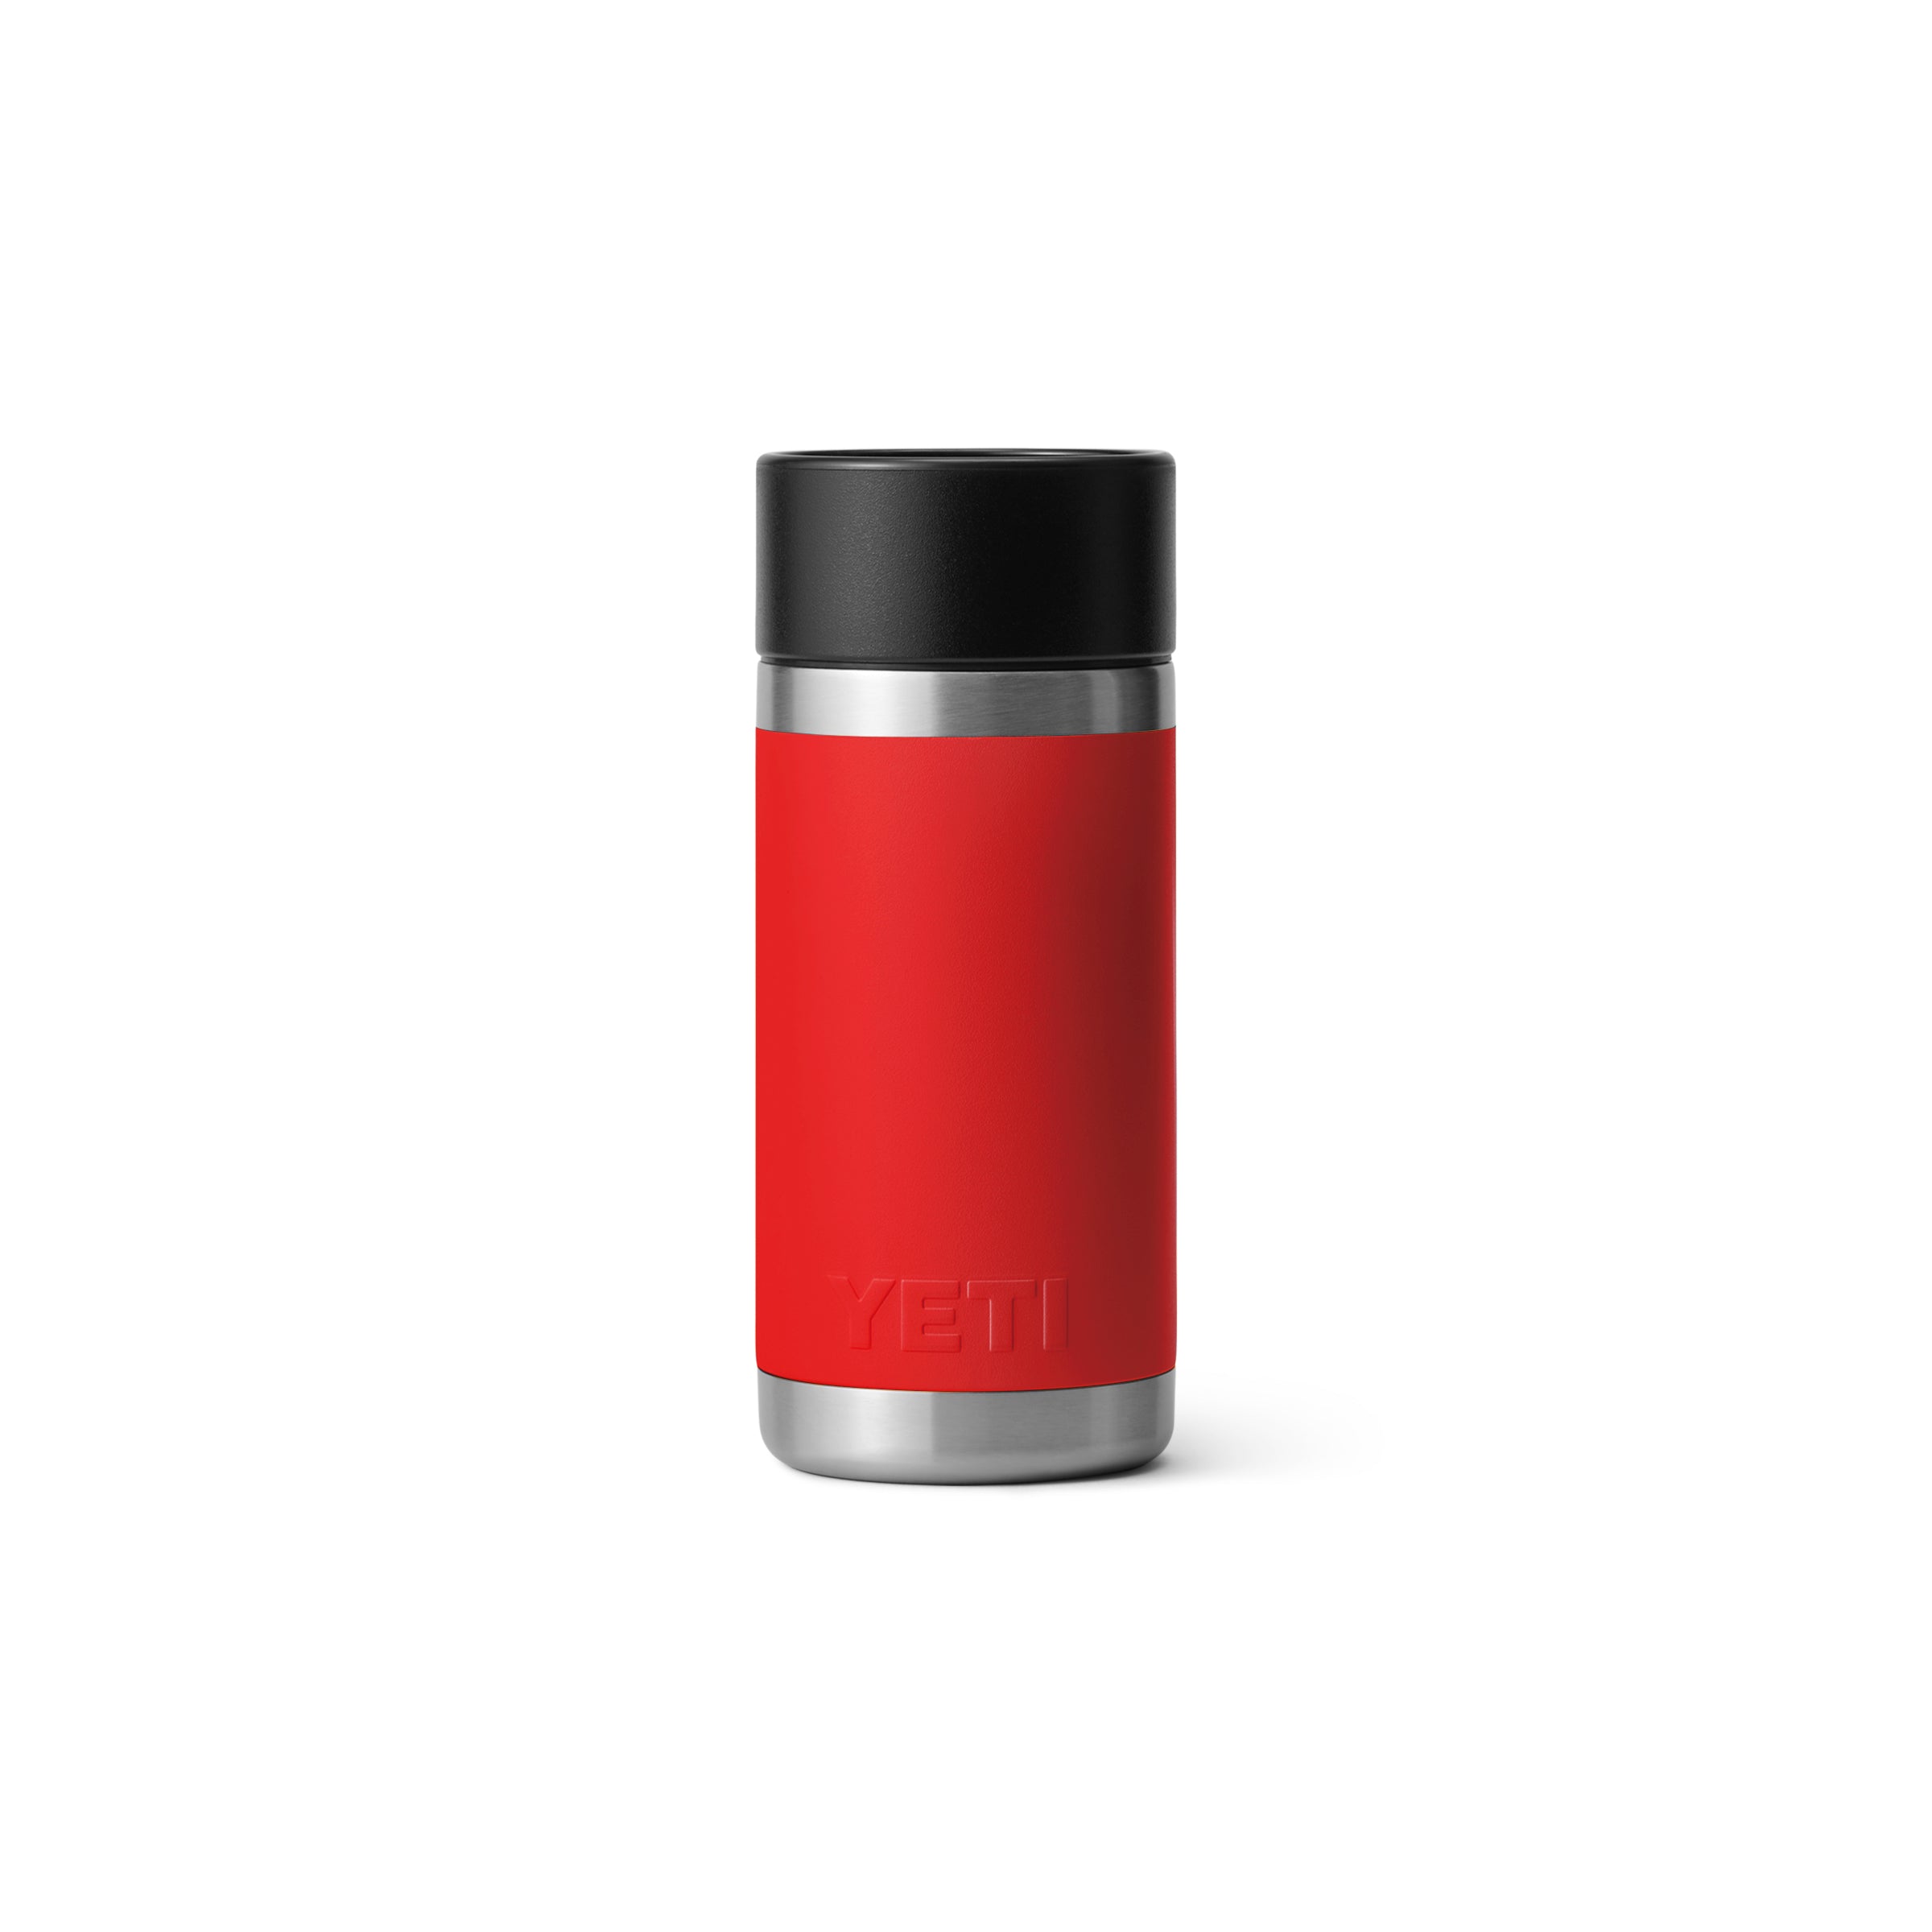 Yeti 12oz Bottle with HotShot Cap - 12OZ / RESCUE RED - Mansfield Hunting & Fishing - Products to prepare for Corona Virus